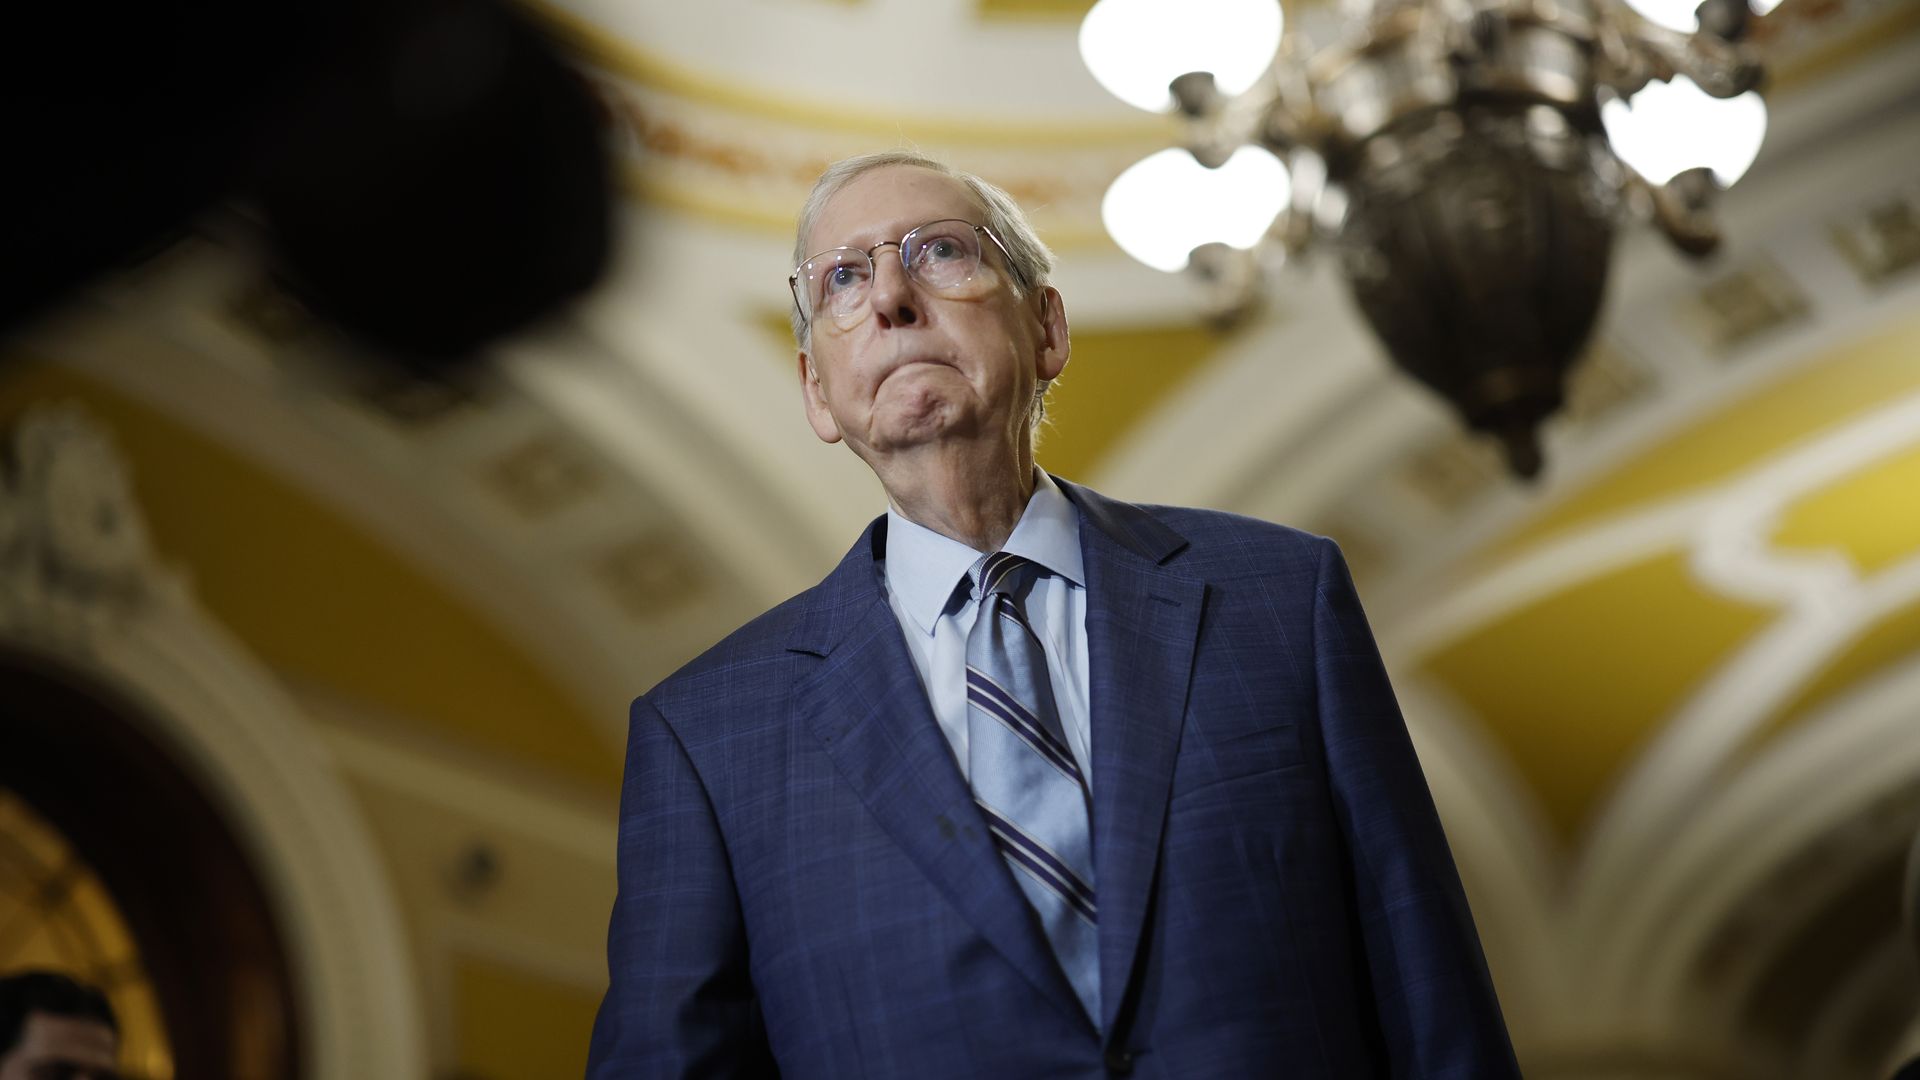 Mitch McConnell in a blue suit and striped tie. Photo is taken from below and a light fixture is in the background. The walls are yellow.